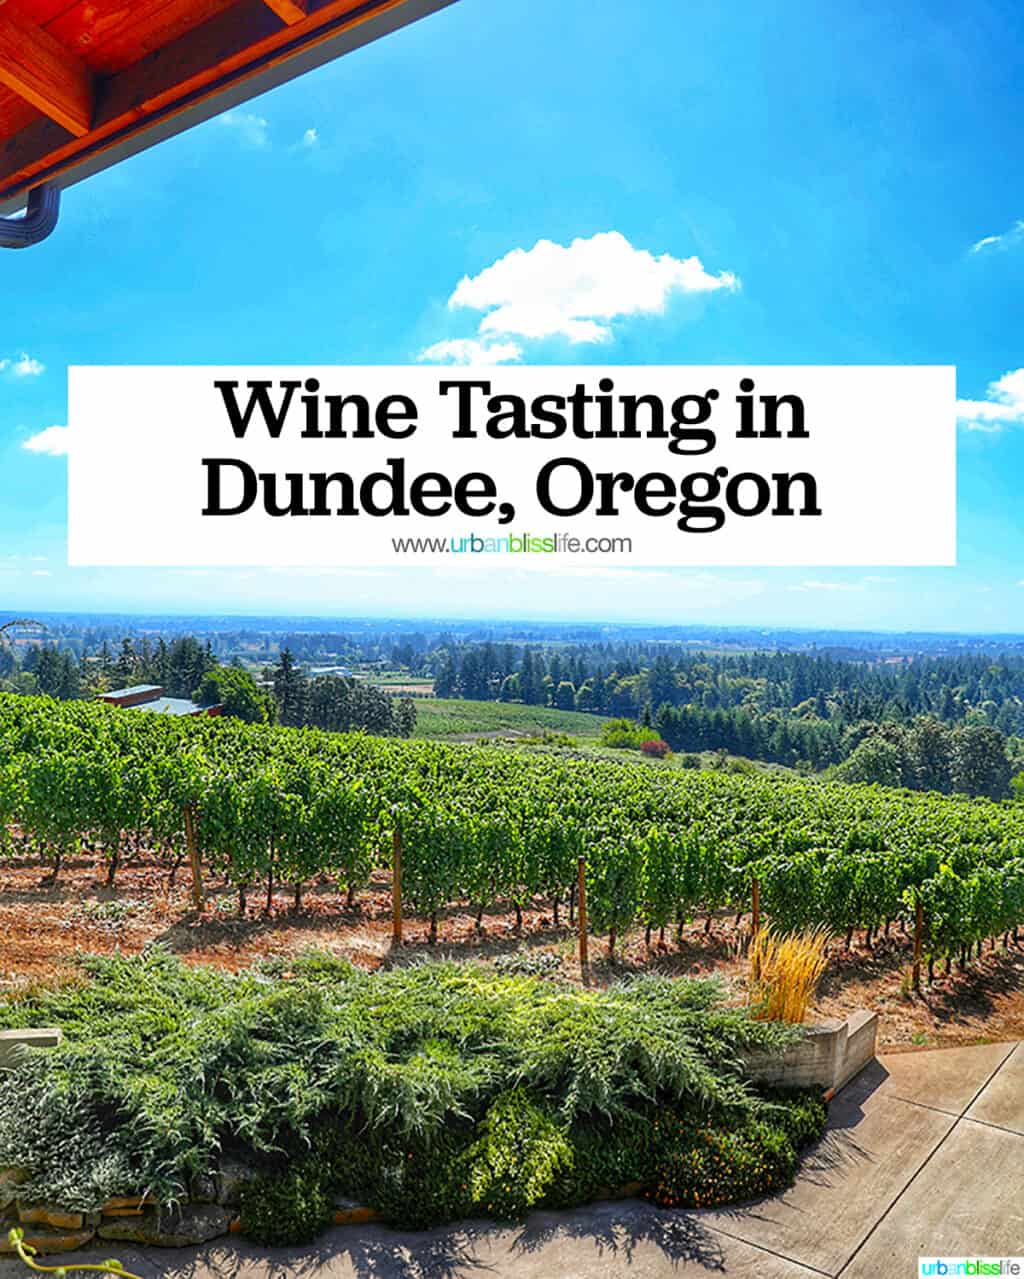 Beautiful vineyard view from Dusky Goose Winery with title text that reads "Wine Tasting in Dundee, Oregon."